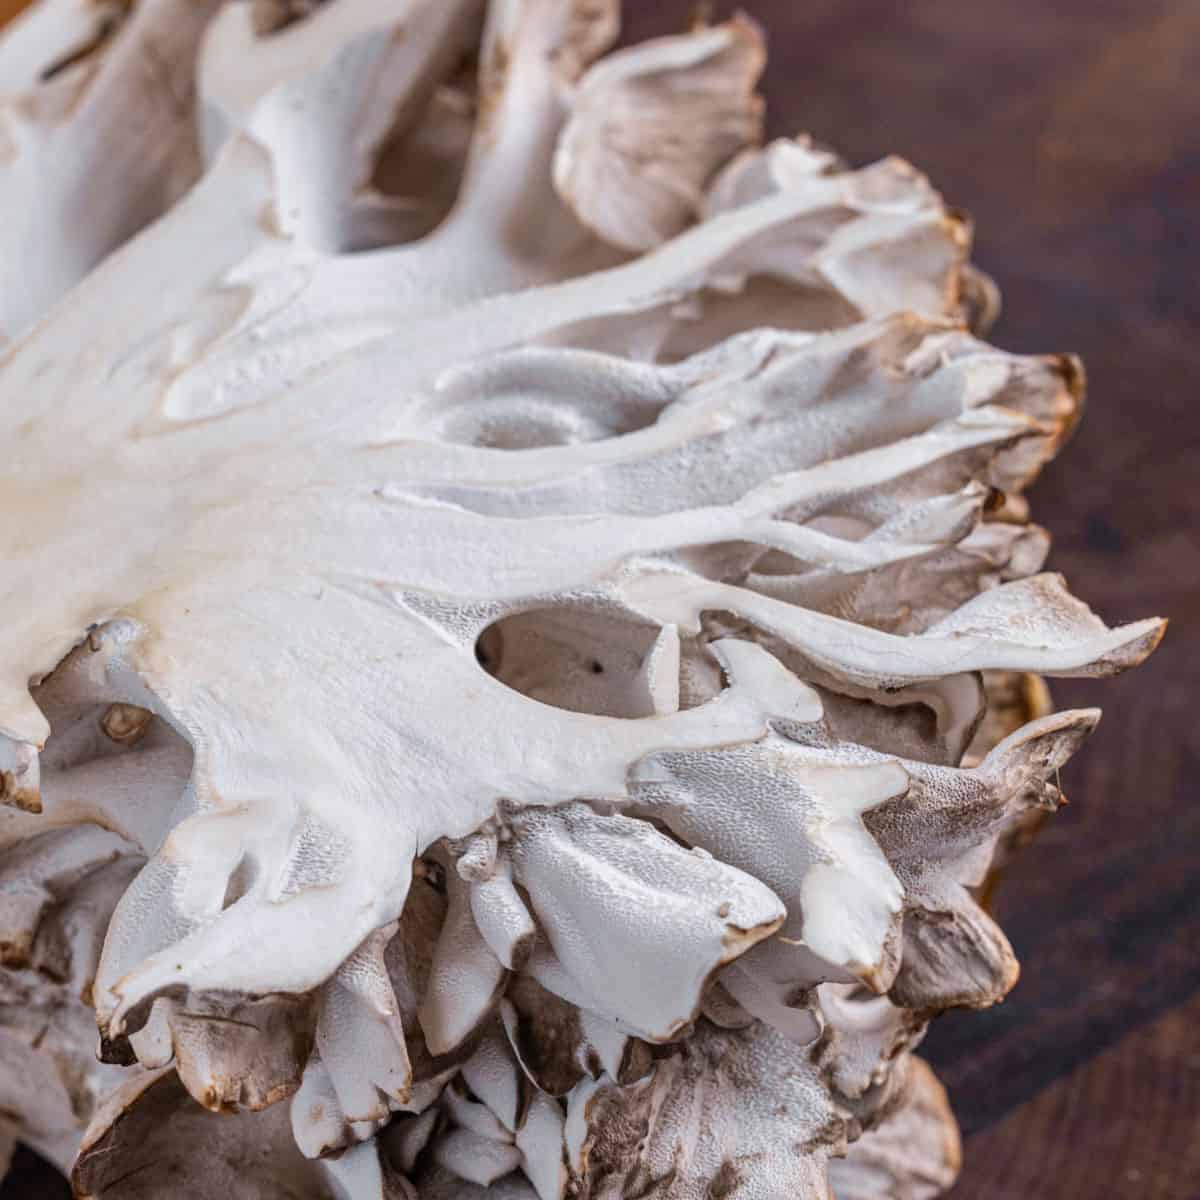 A close up shot of the white inside of a mushroom showing its shape.